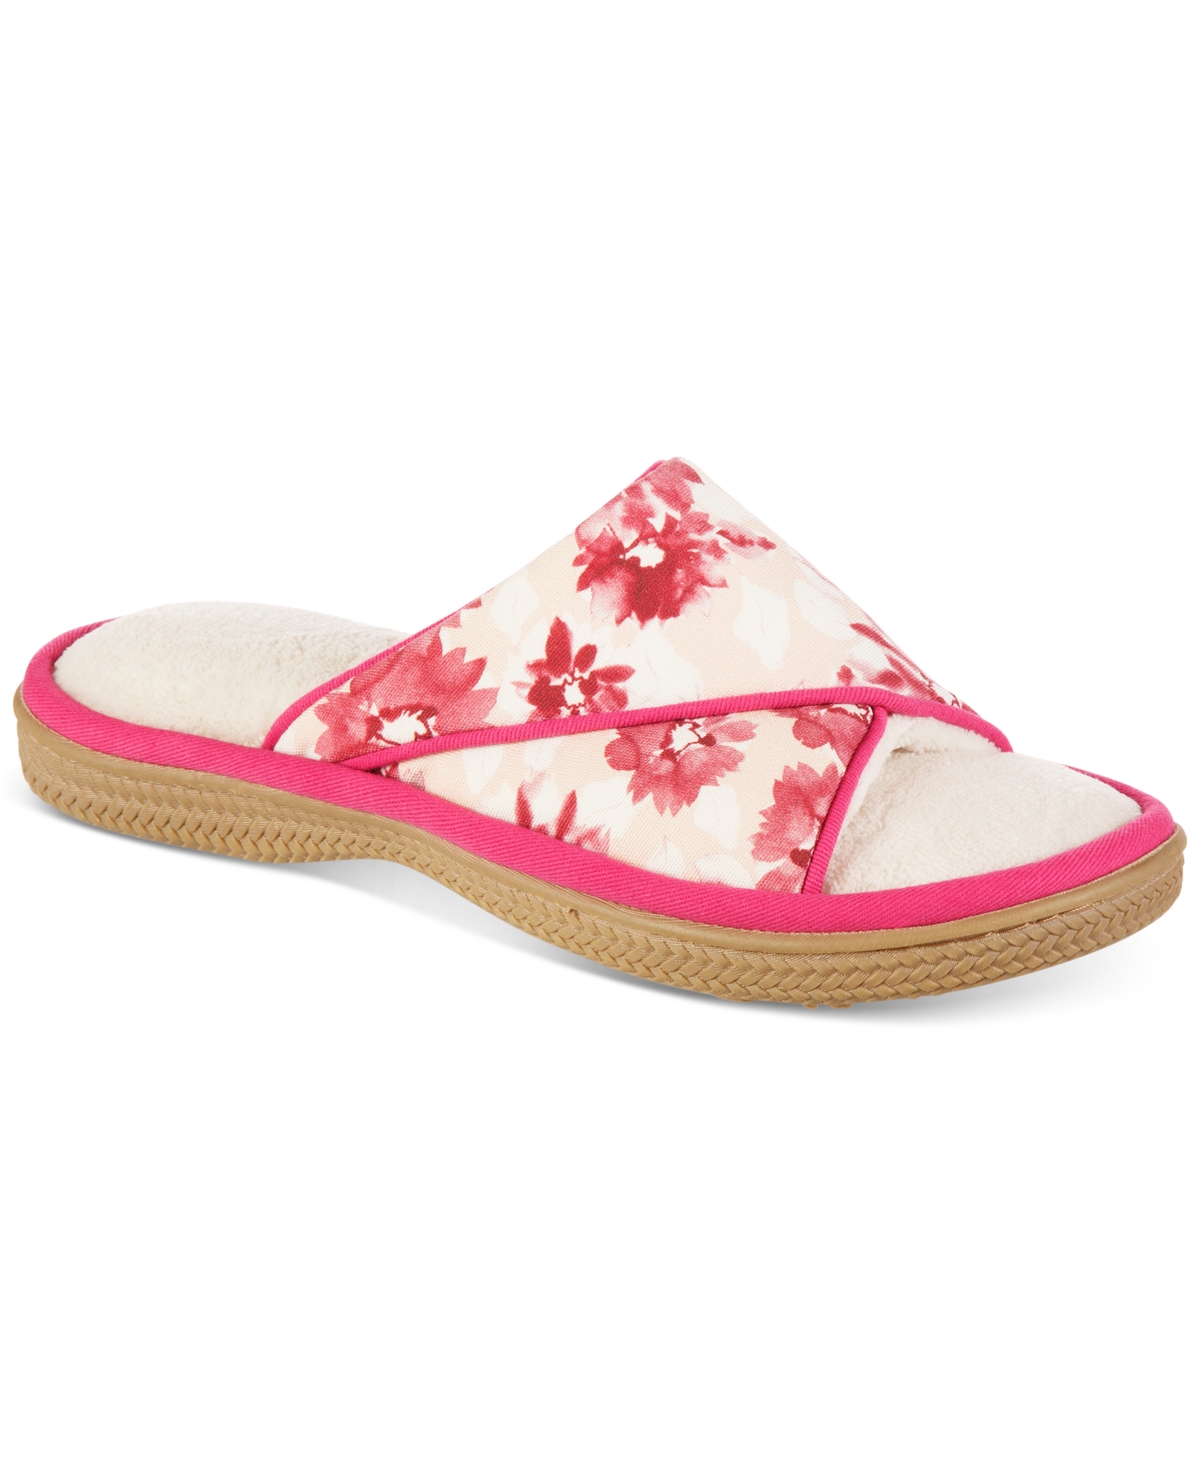 ISOTONER SIGNATURE WOMEN'S KELLY FLORAL SLIDE SLIPPERS